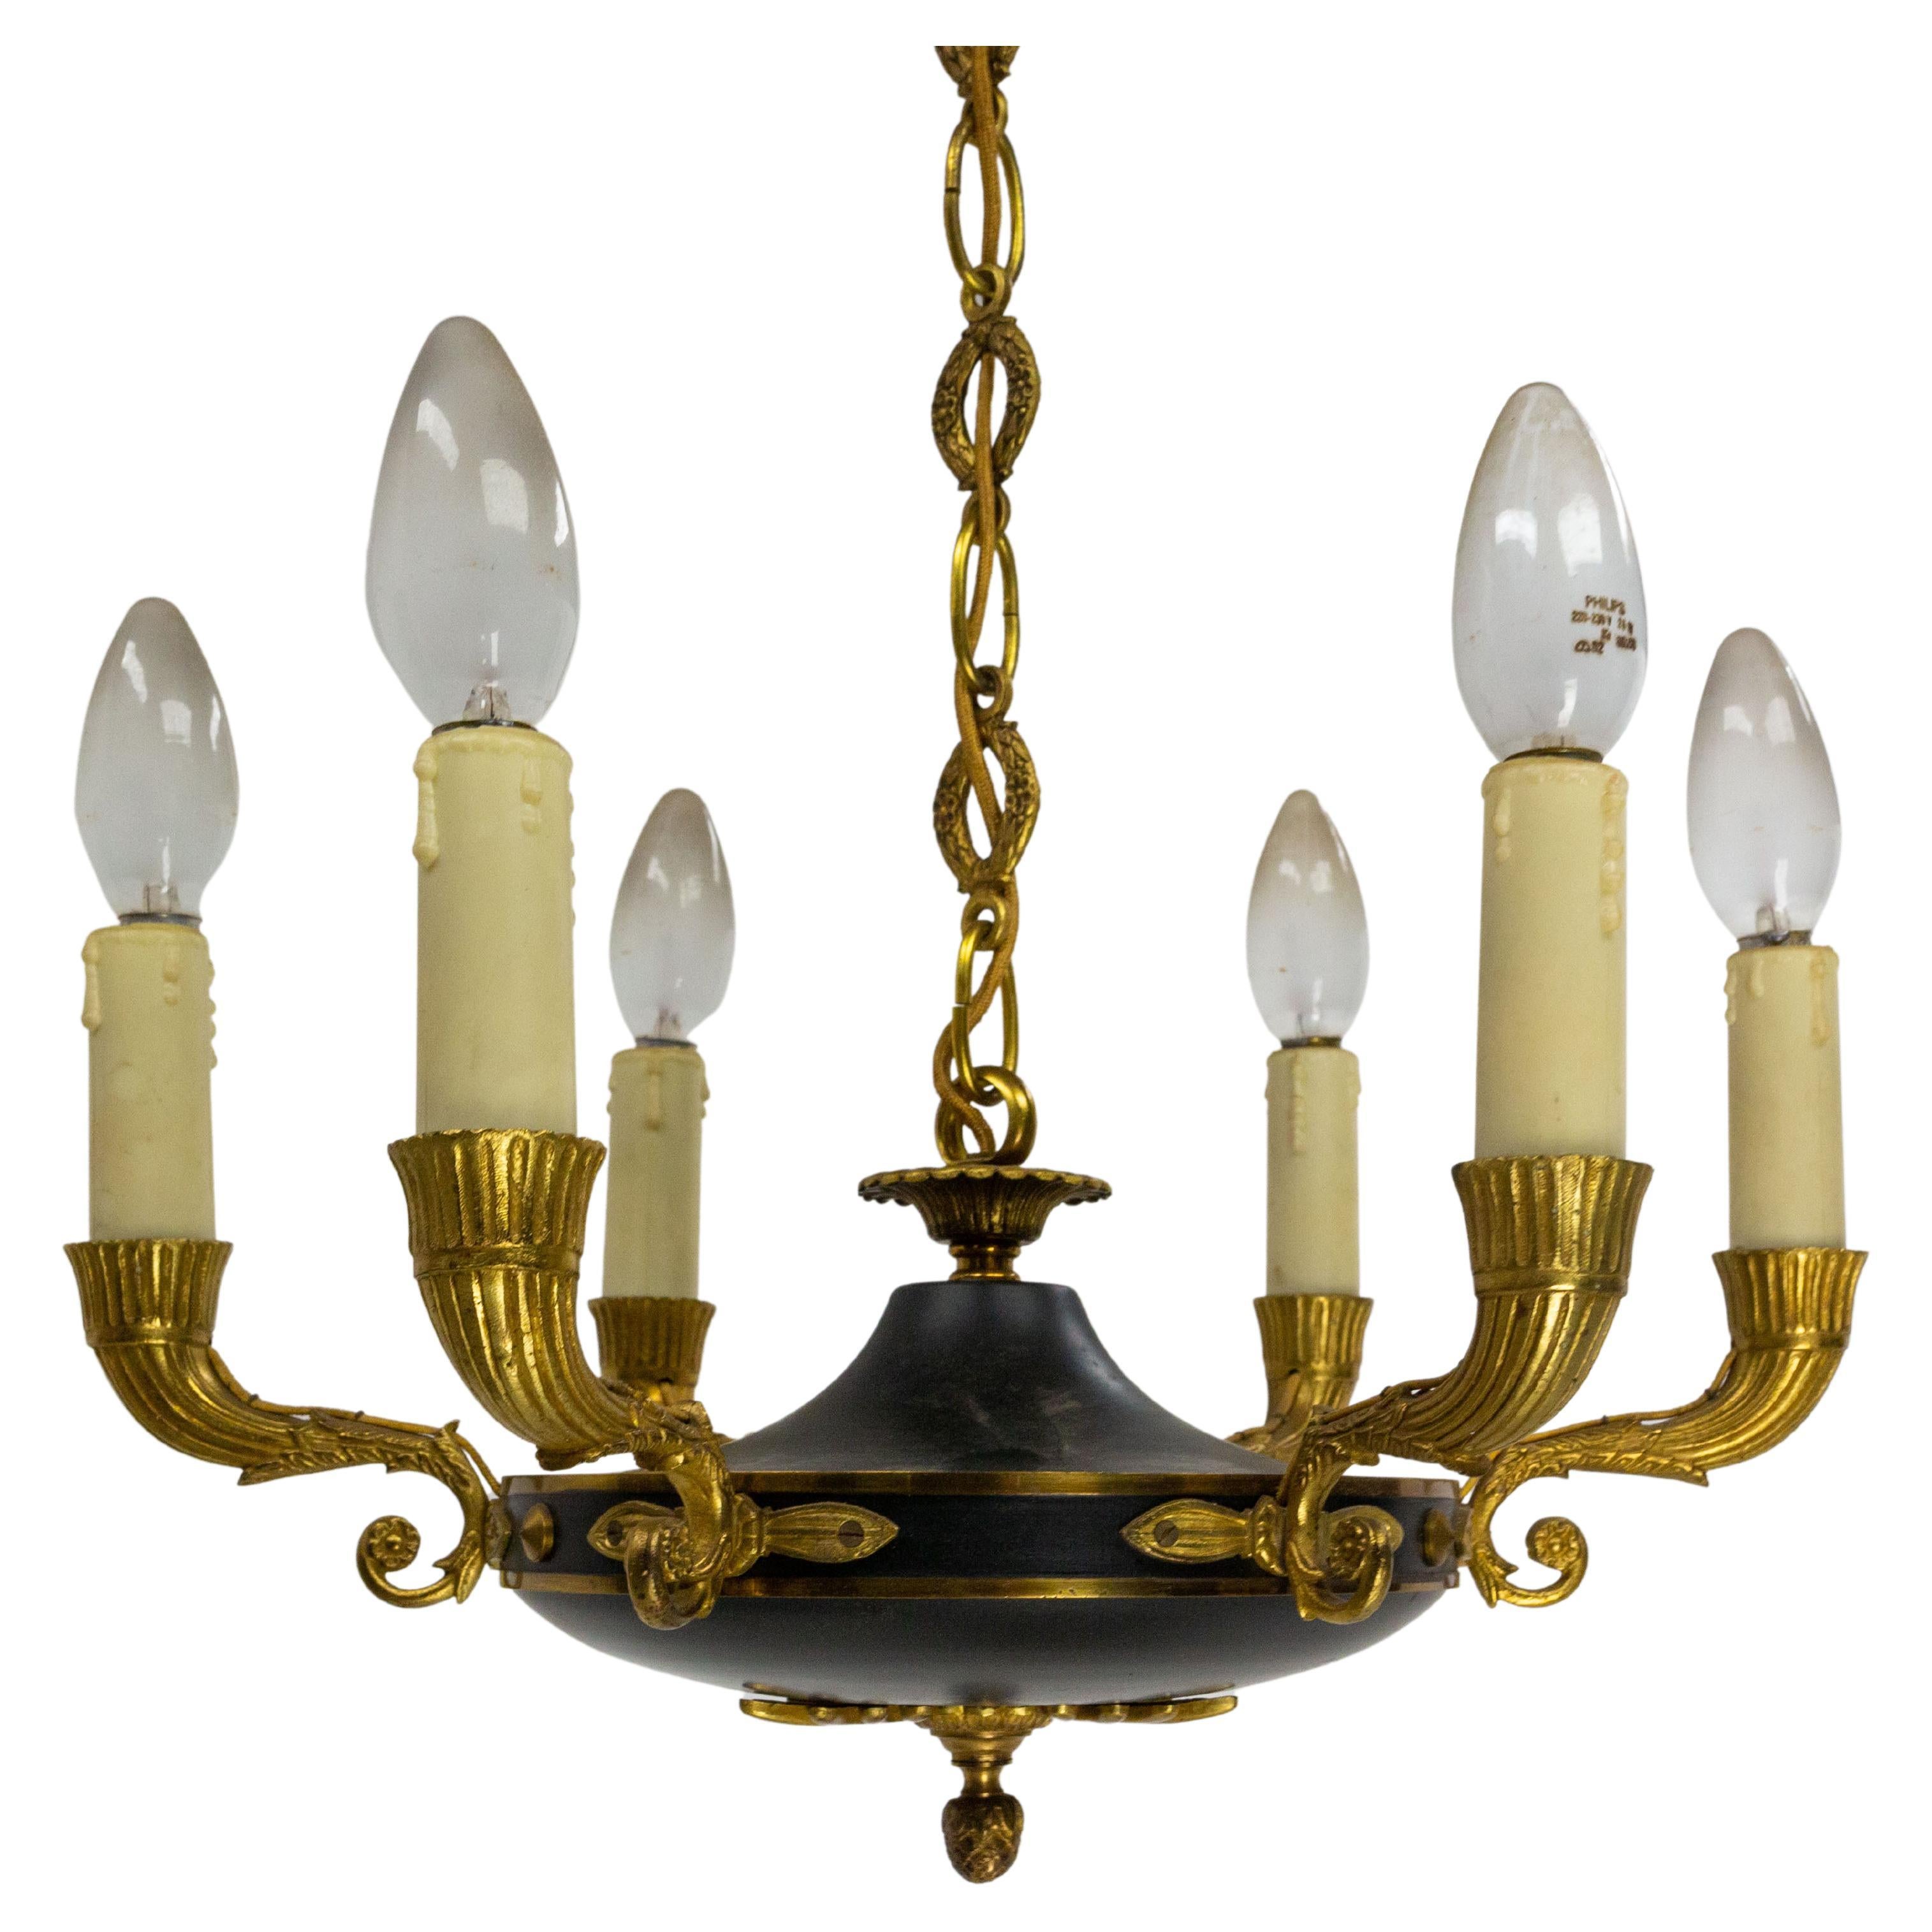 French Empire Revival Chandelier, Midcentury